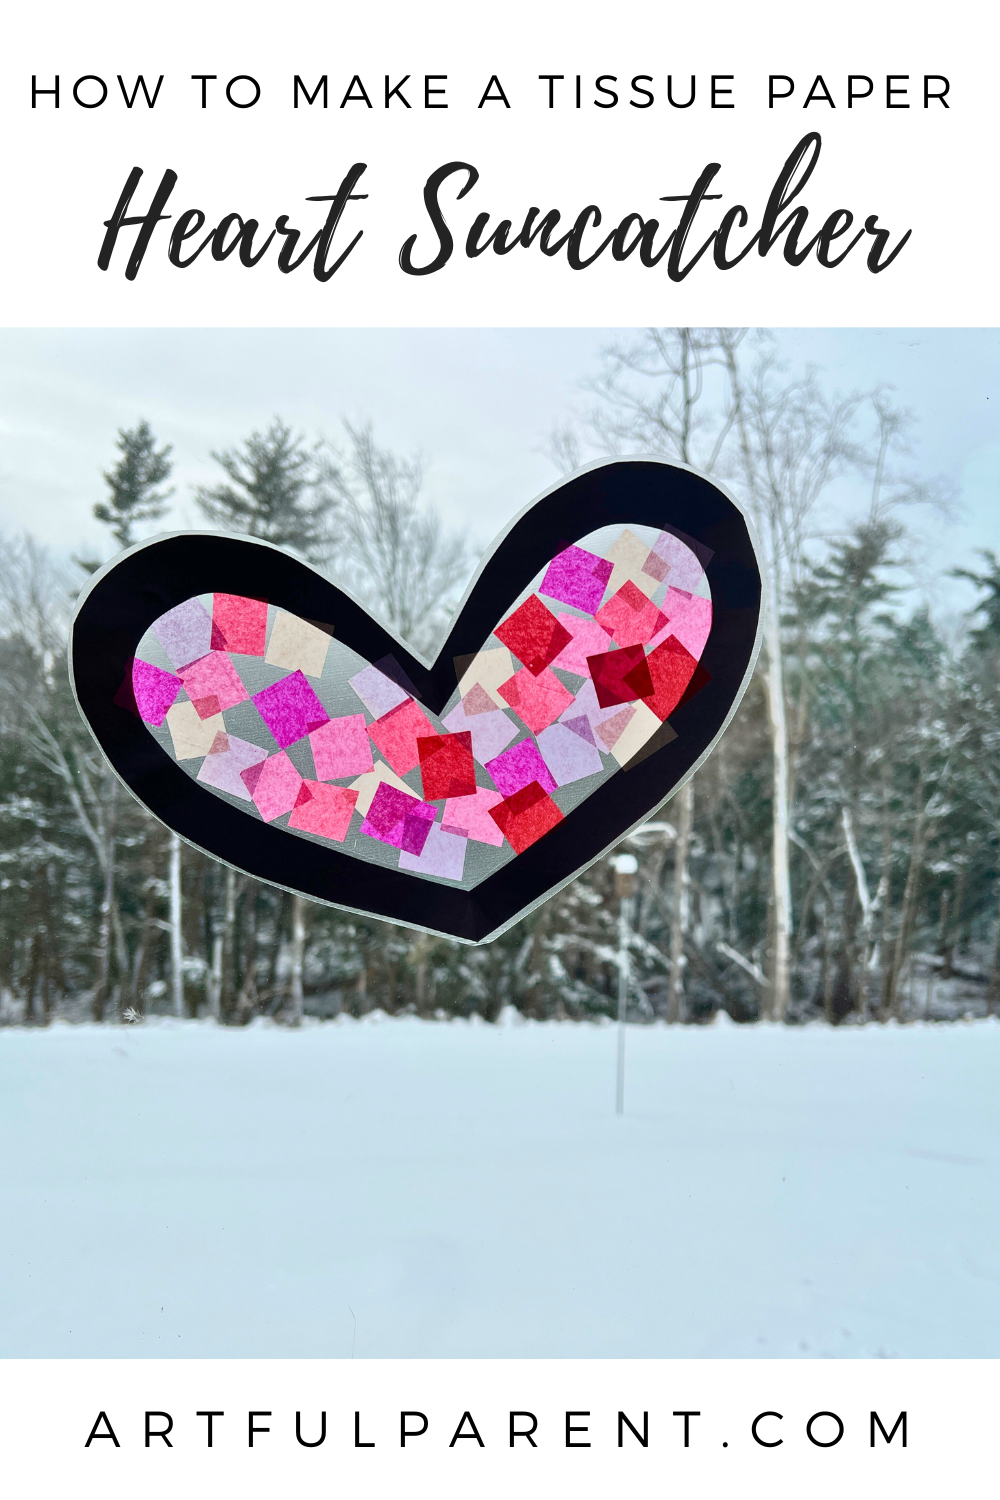 How to Make a Heart Suncatcher with Tissue Paper